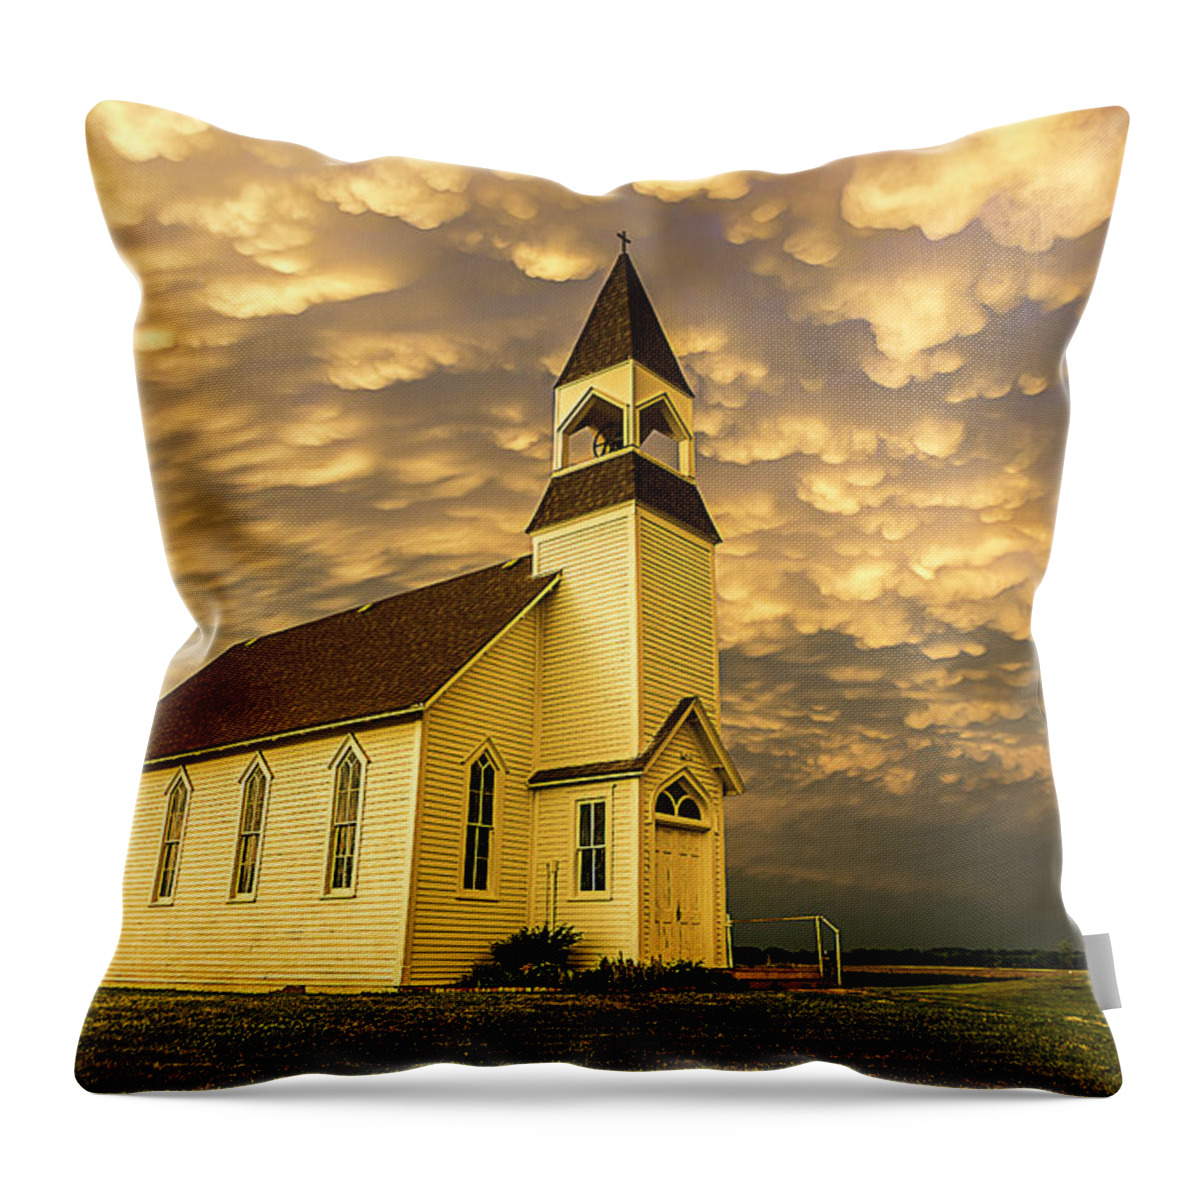 Clouds Throw Pillow featuring the photograph Sunday Funday by Marcus Hustedde